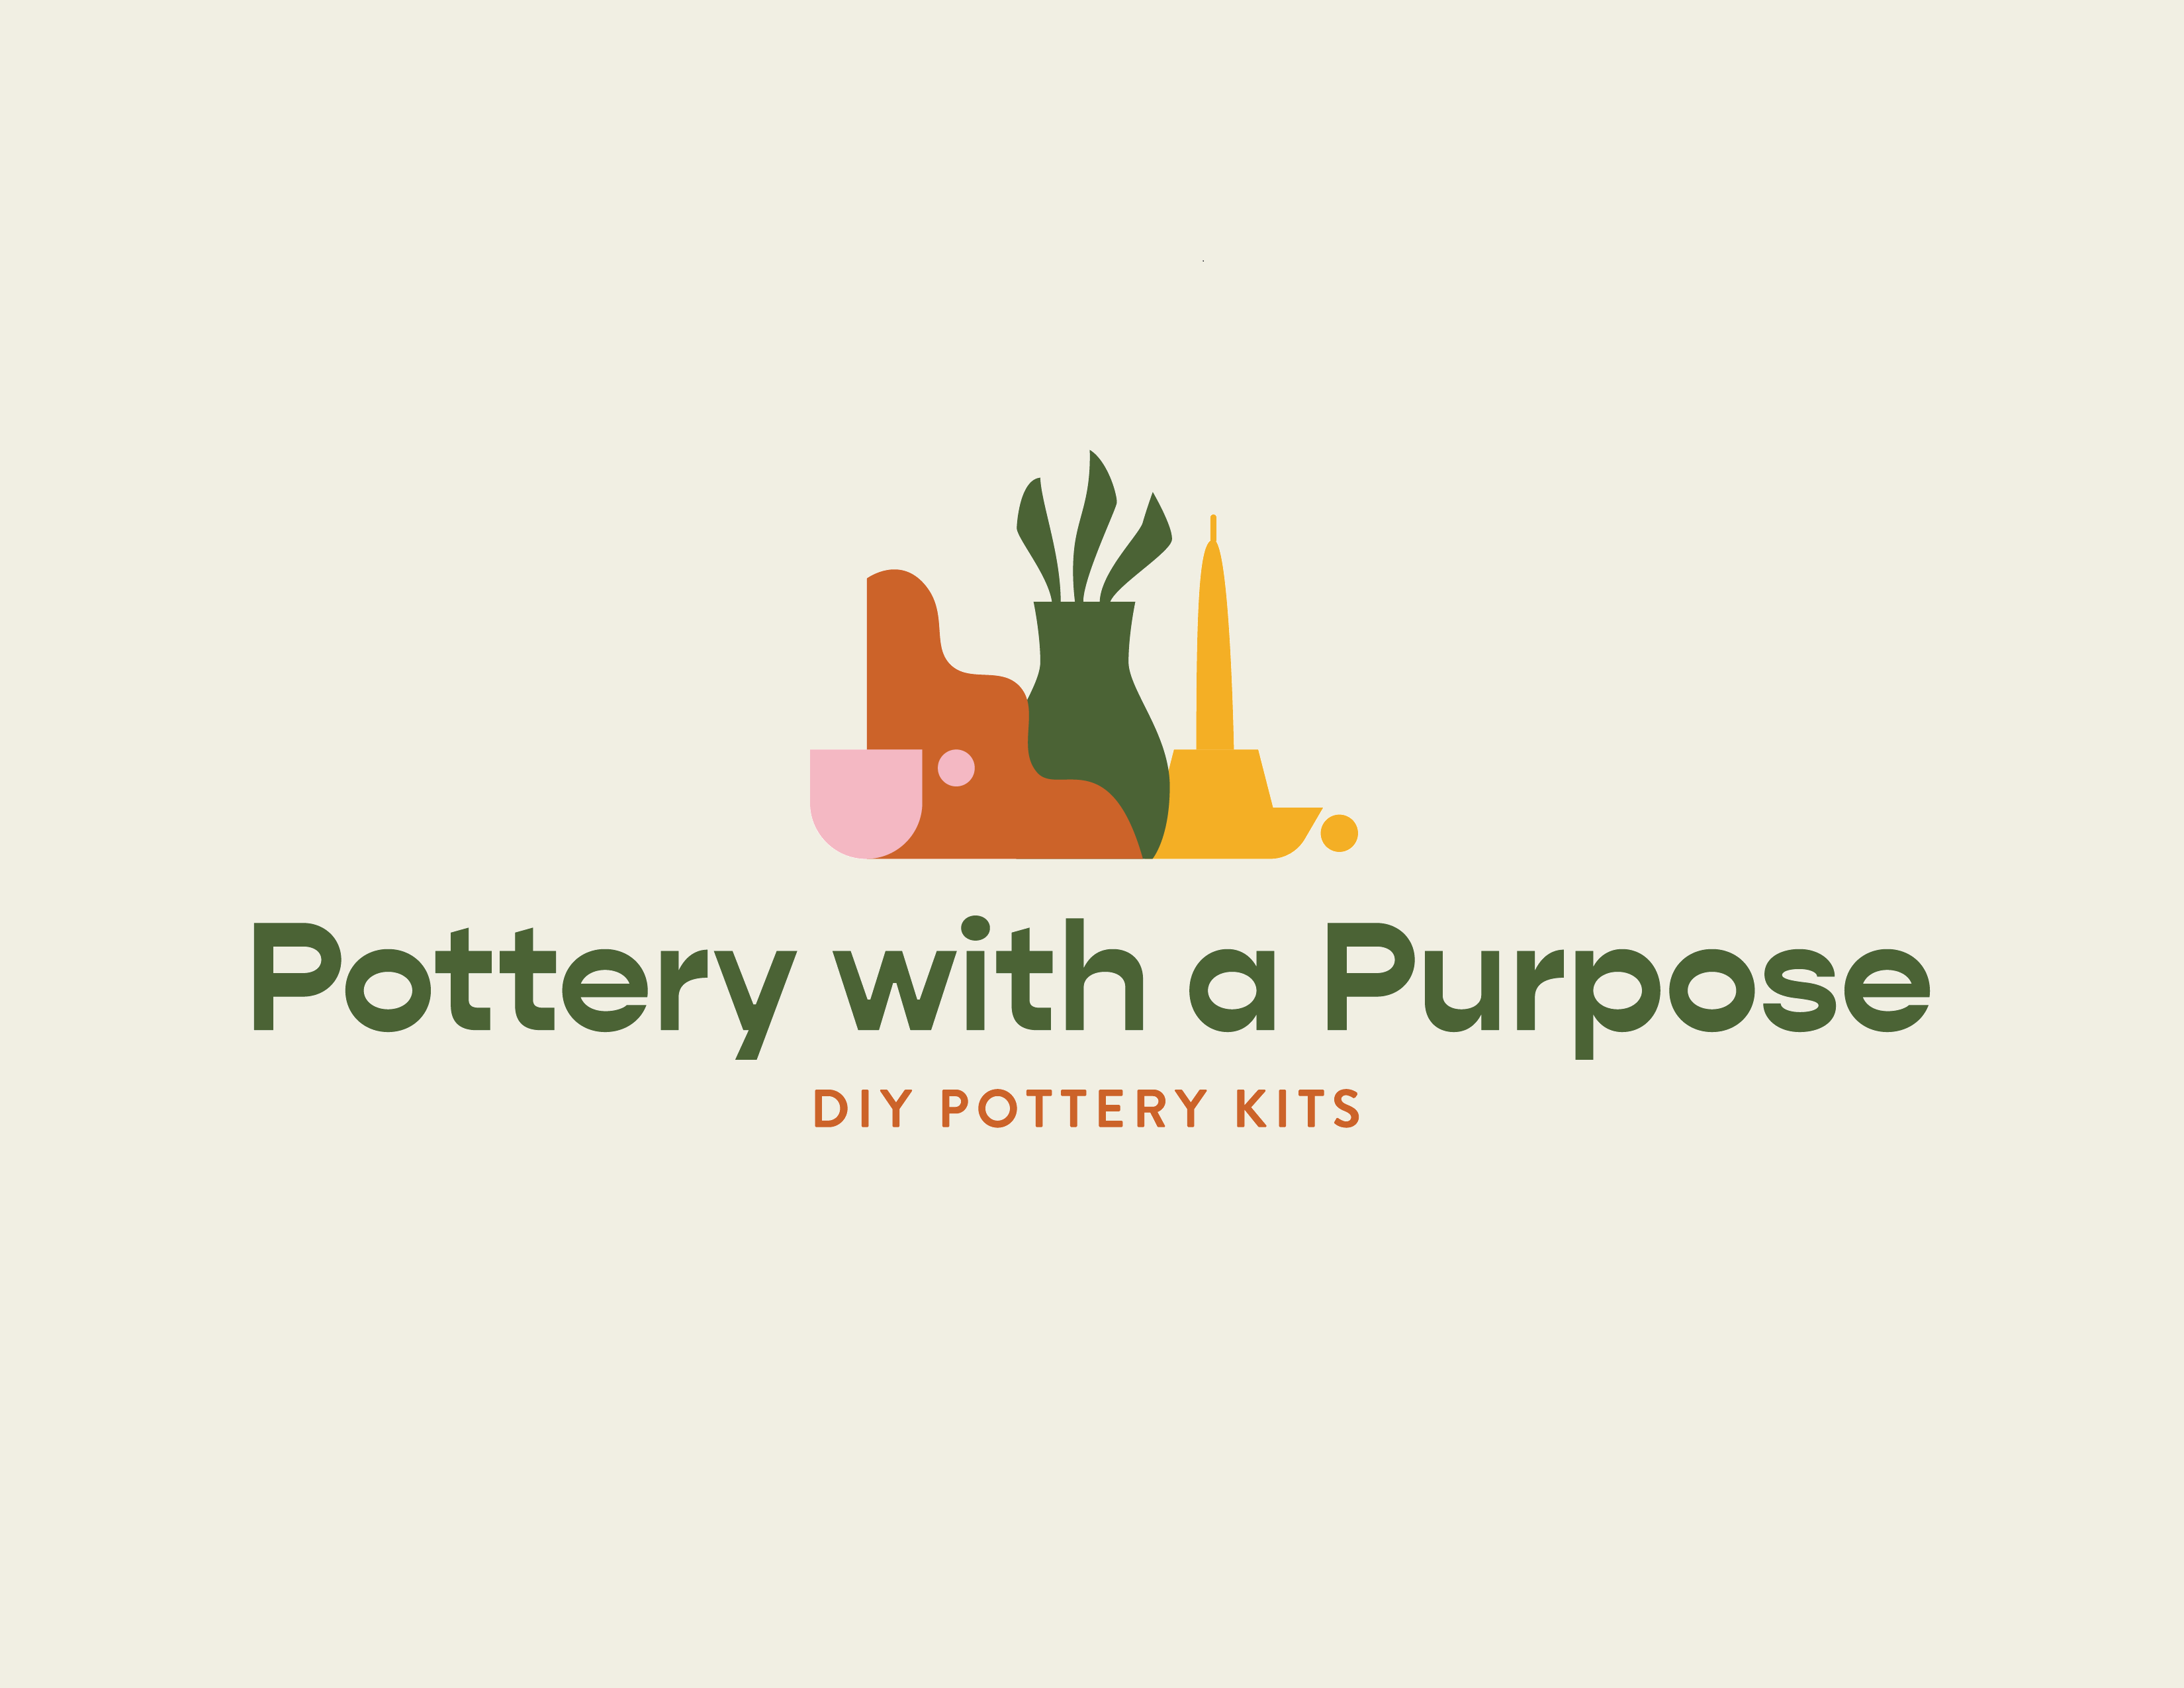 Pottery with a Purpose